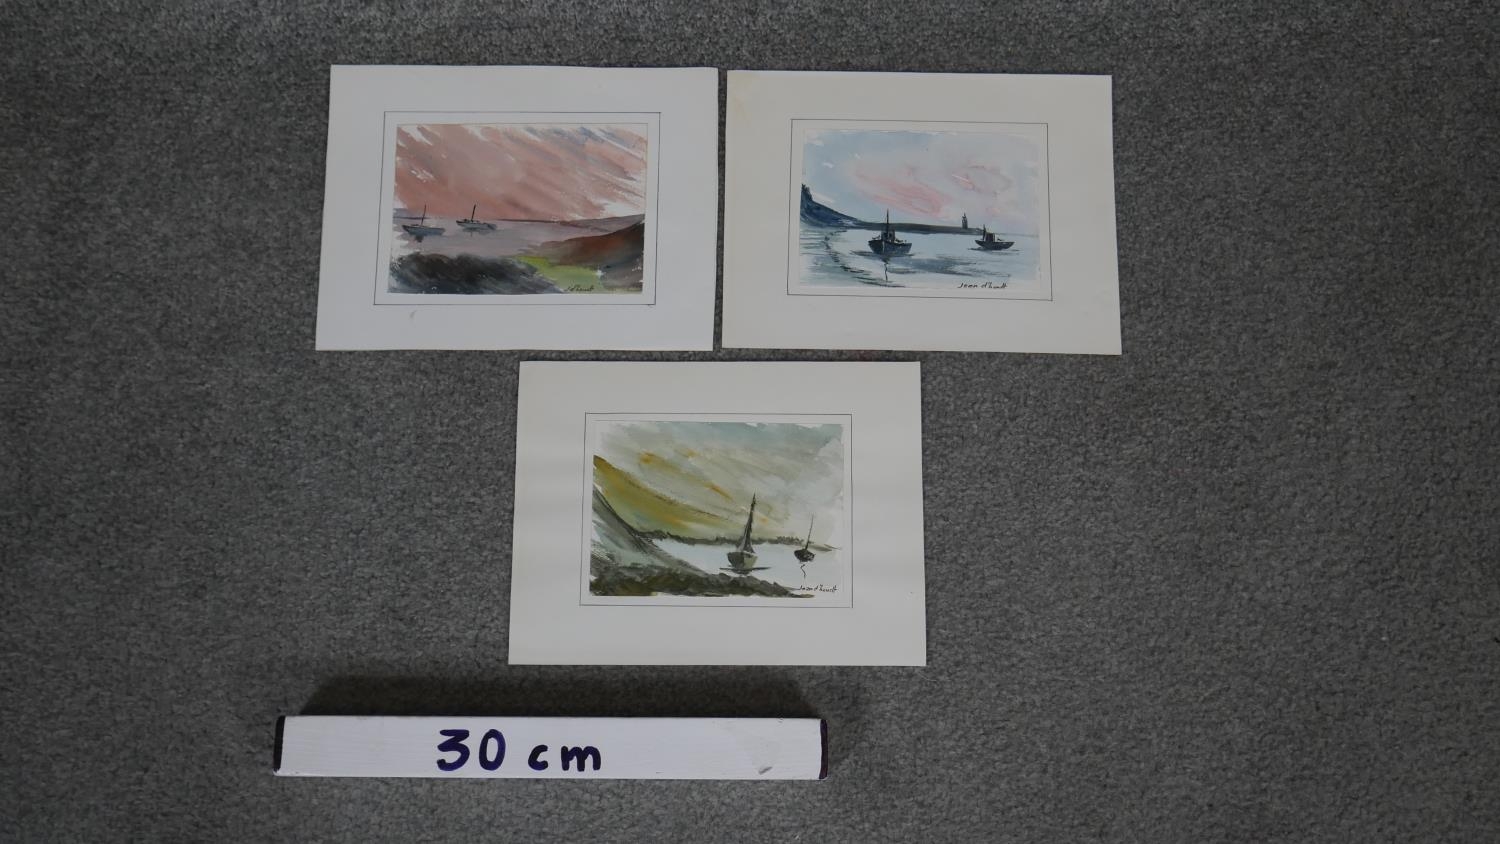 Jean D'hondt (1930-) Three unframed watercolours of landscapes with sailing boats. Signed by artist.